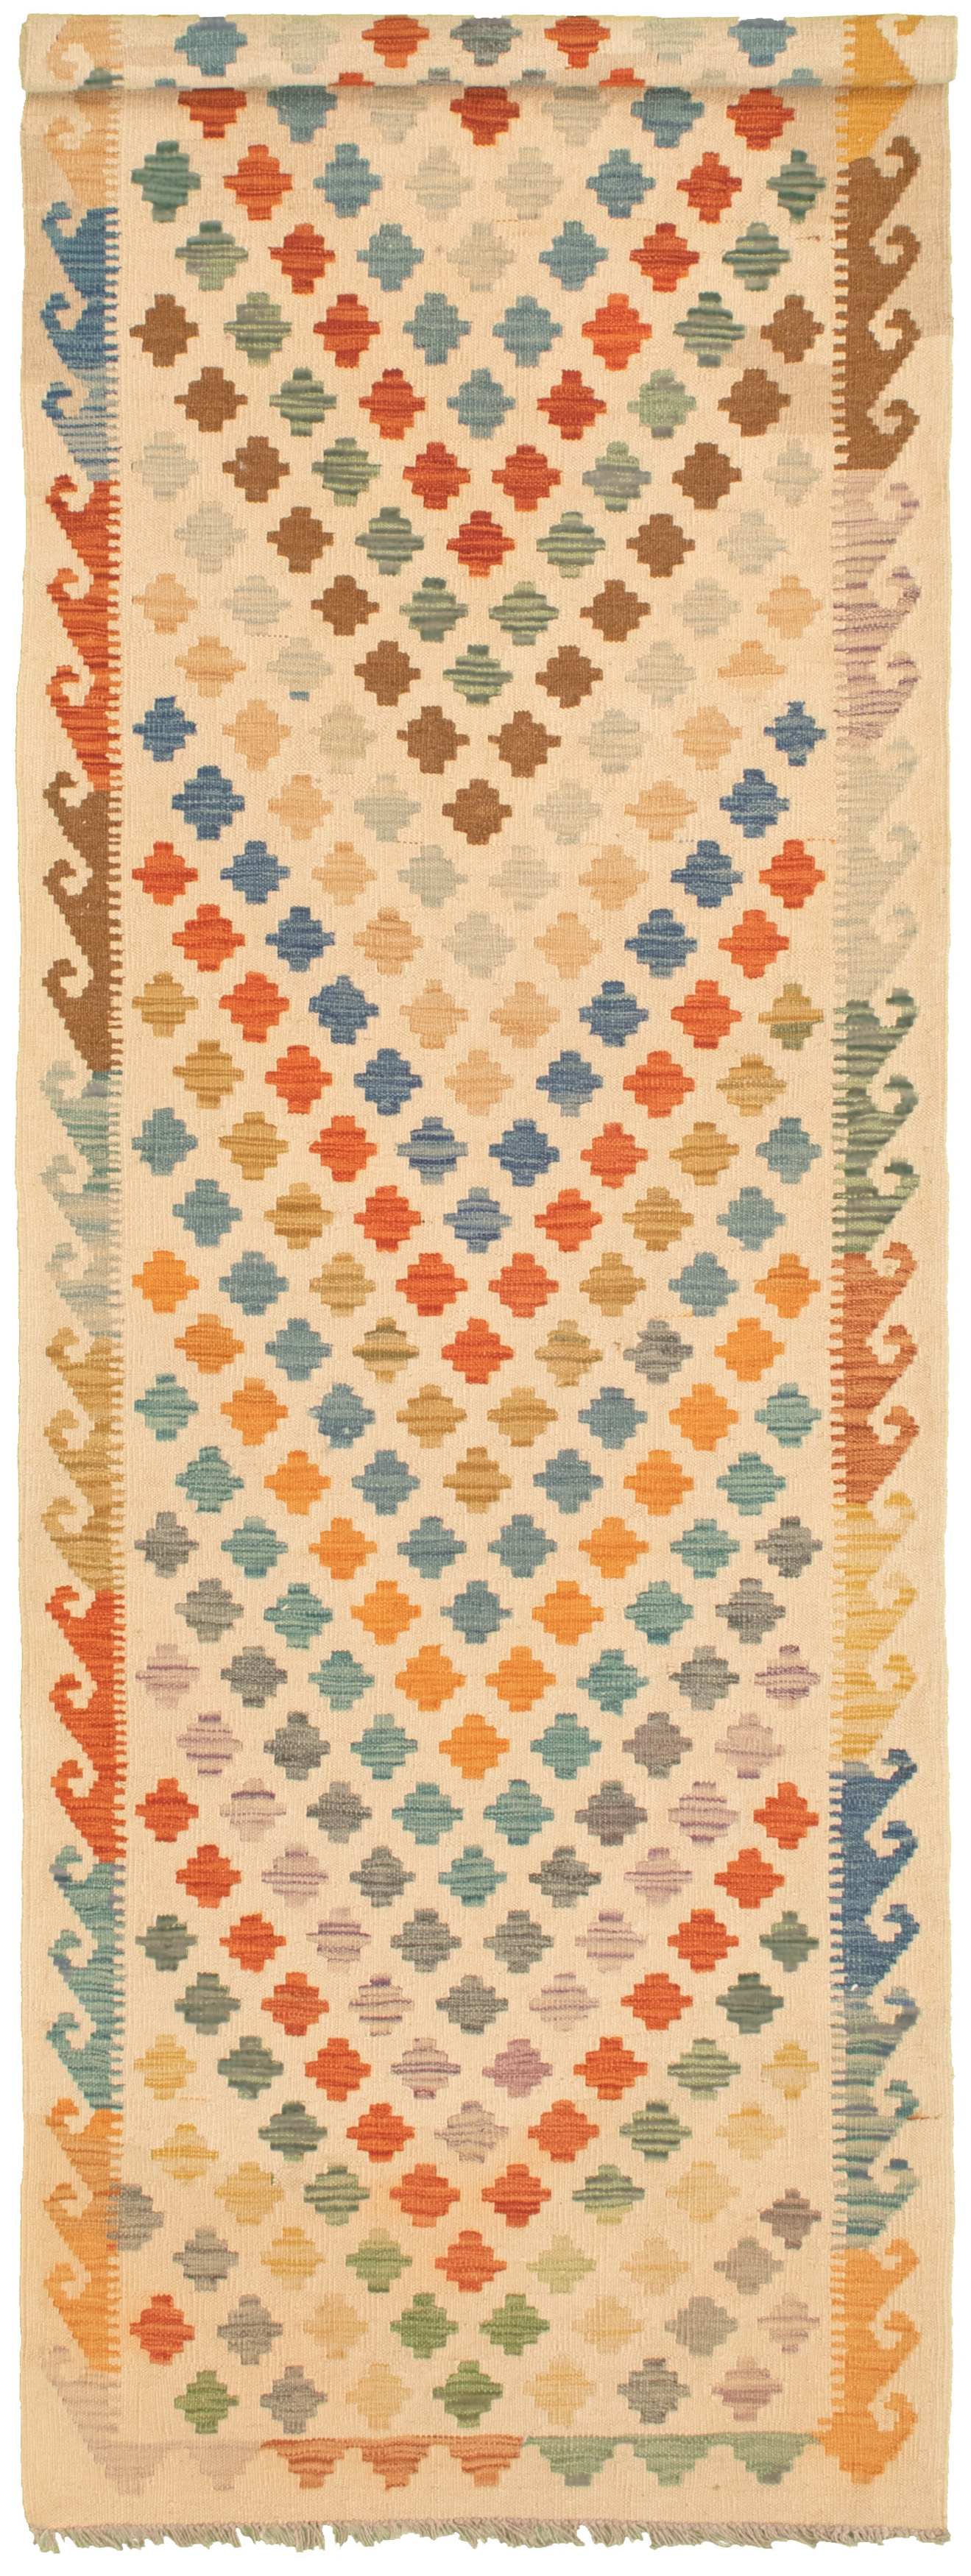 Hand woven Bold and Colorful  Cream Wool Kilim 3'0" x 9'9" Size: 3'0" x 9'9"  